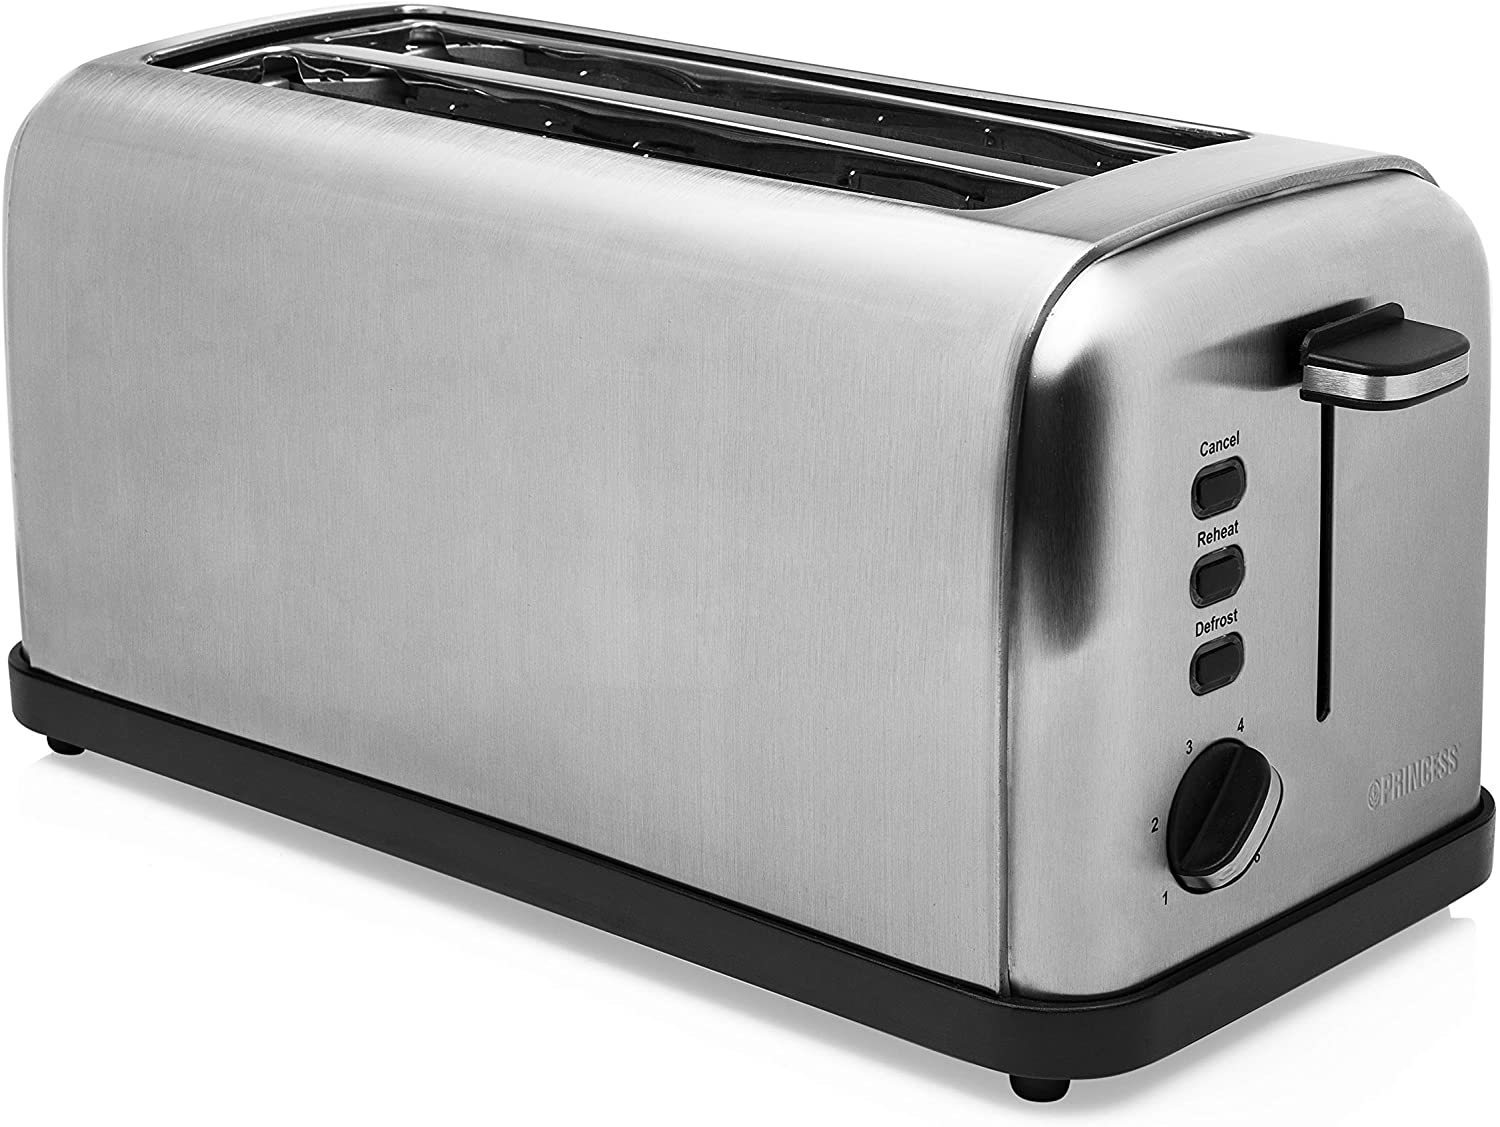 Princess Long slot stainless steel toaster - 6 adjustable browning levels with bun attachment, removable crumb compartment - defrosting, warm-up and stop function, 142389